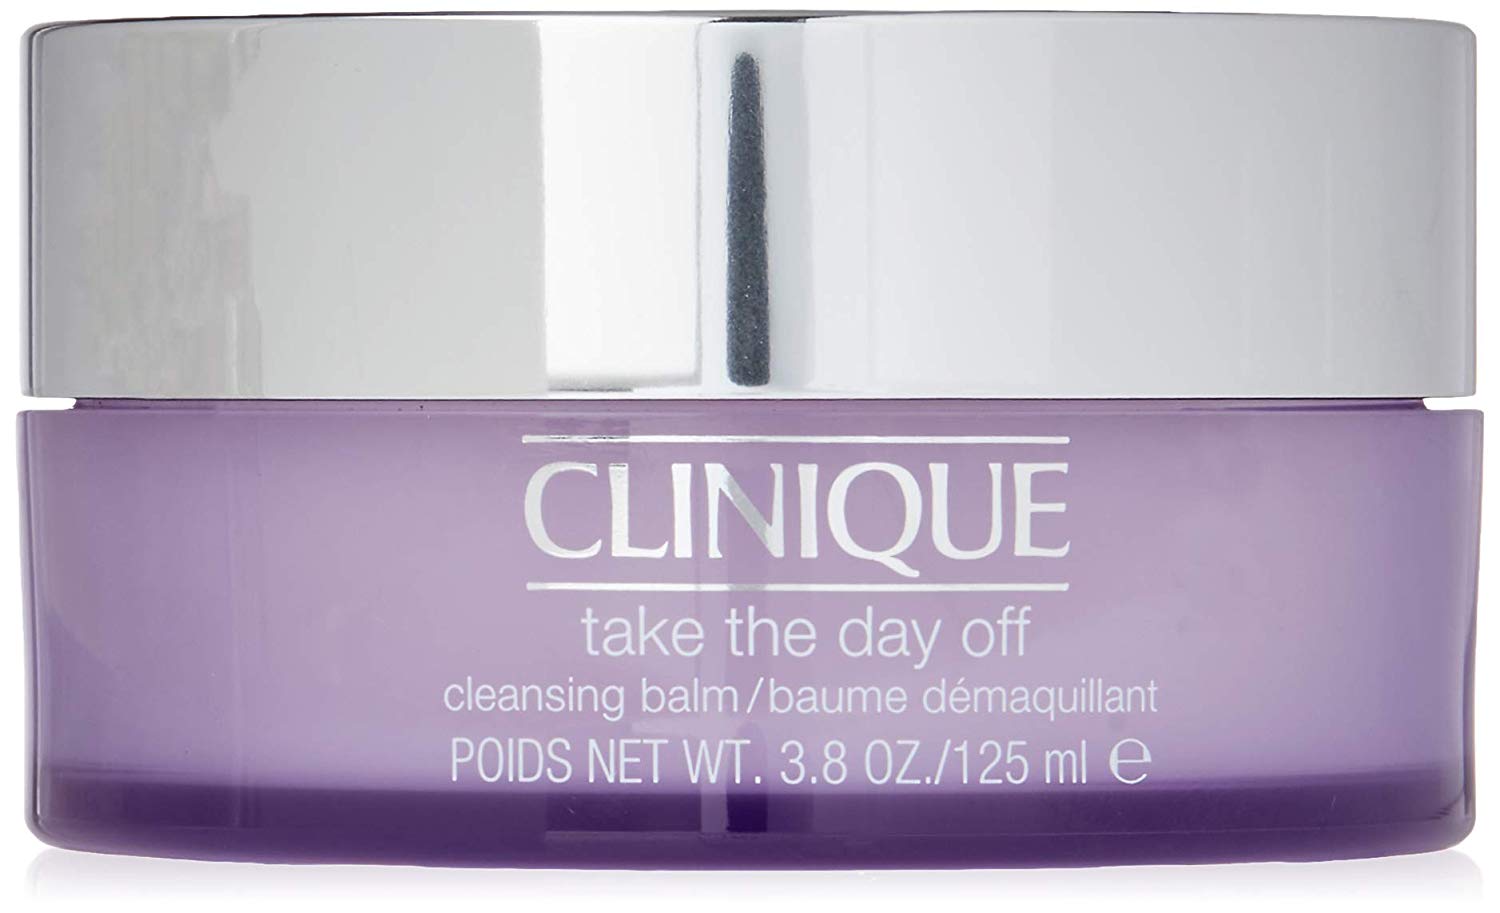 Clinique Take The Day Off Cleansing Balm 3.8oz - Shopping Bookmarks